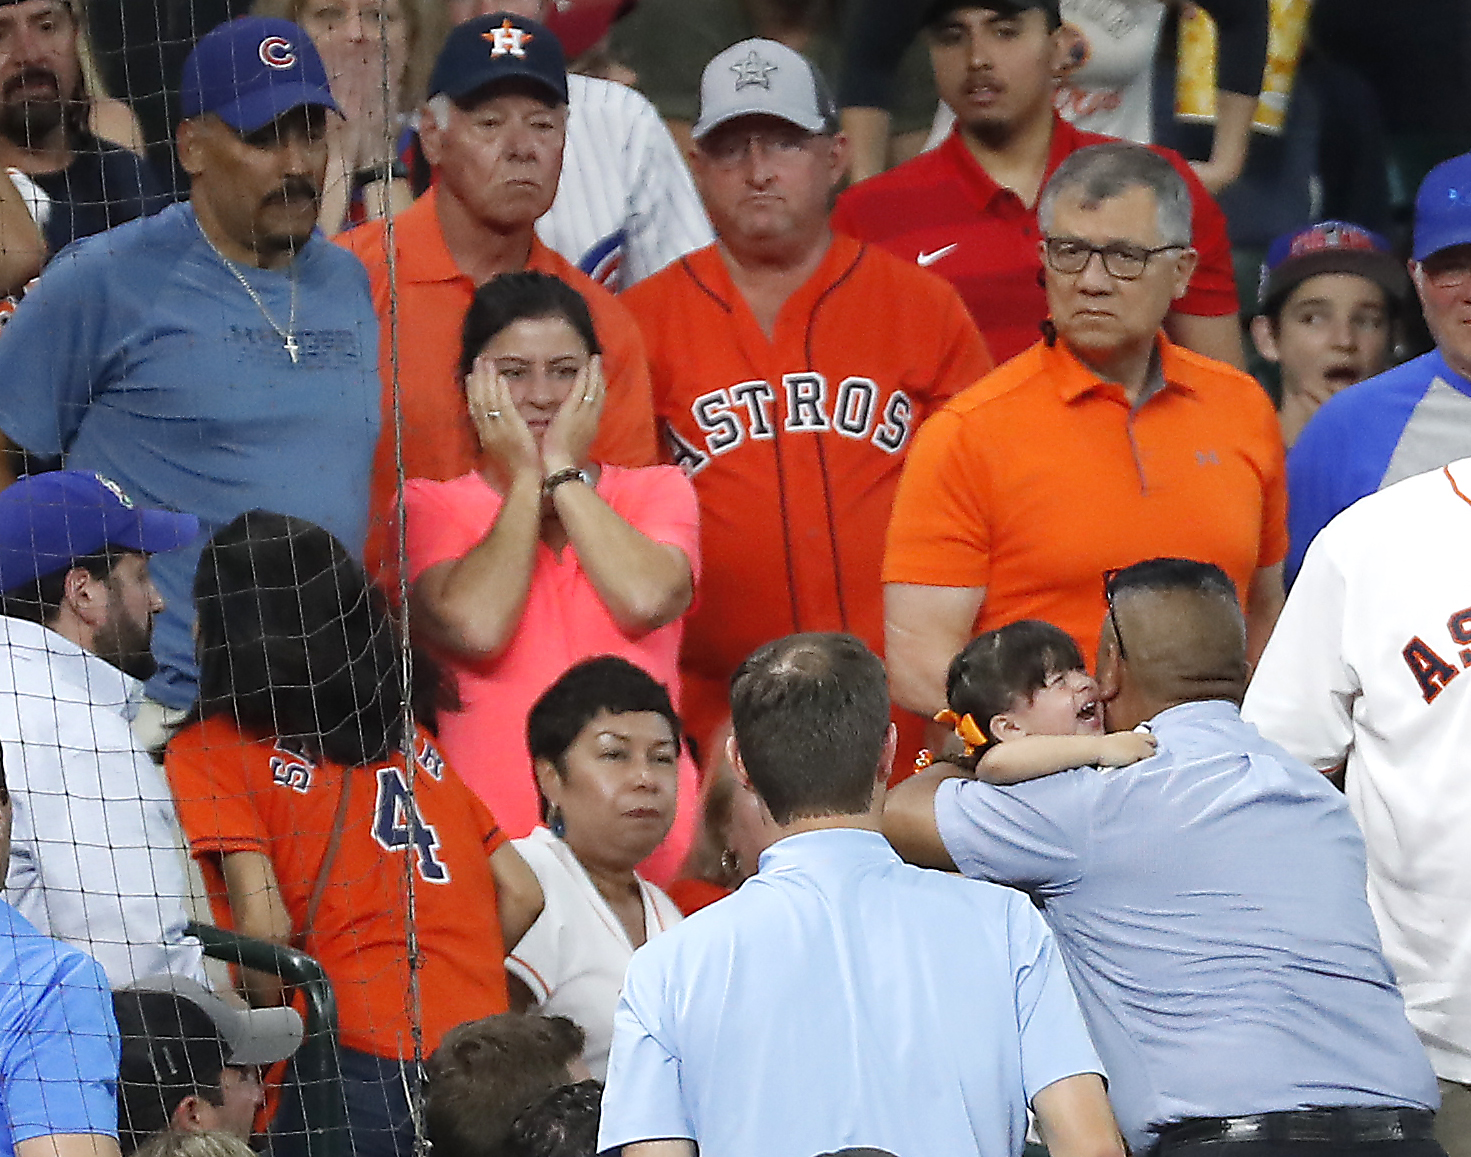 Young fan struck by foul ball during Astros-Cubs game - Houston Chronicle